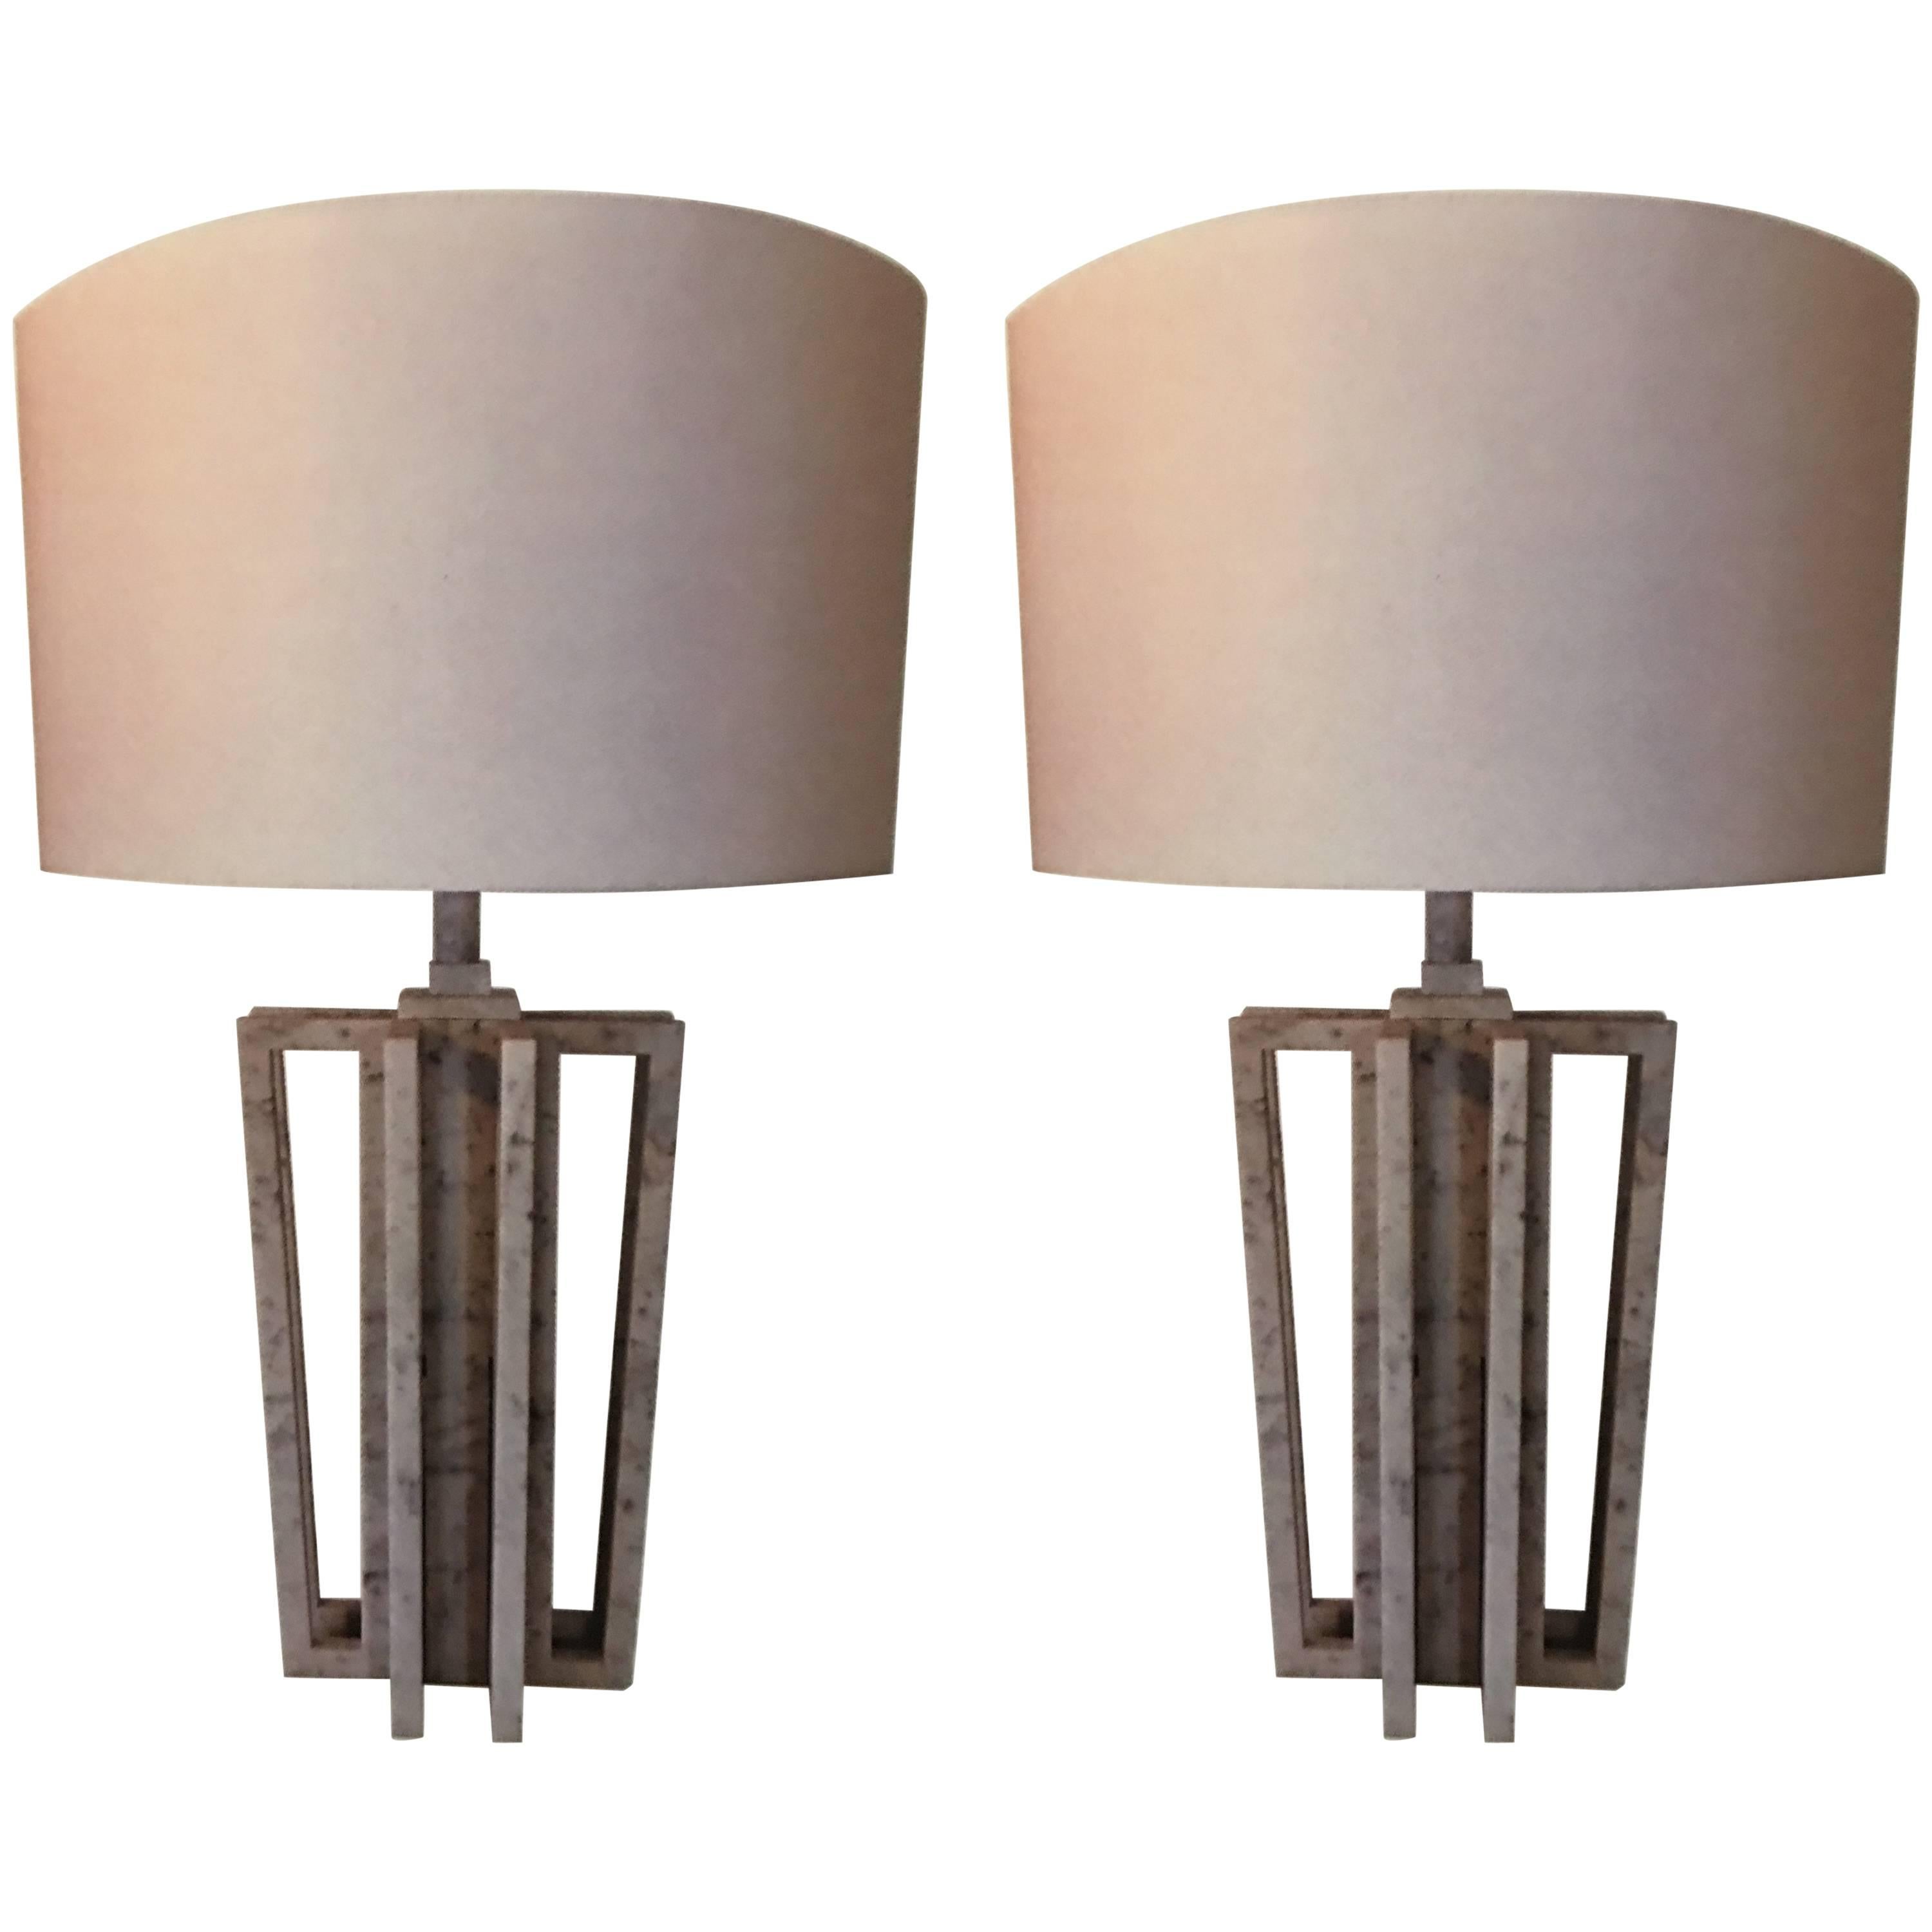 Pair of VARA Italian white Carrara marble table lamps by Massimo Mangiardi. 

Sleek modern pieces with unique construction with inter-stacked open framed parts totally in white Carrara marble forming the base. 

            